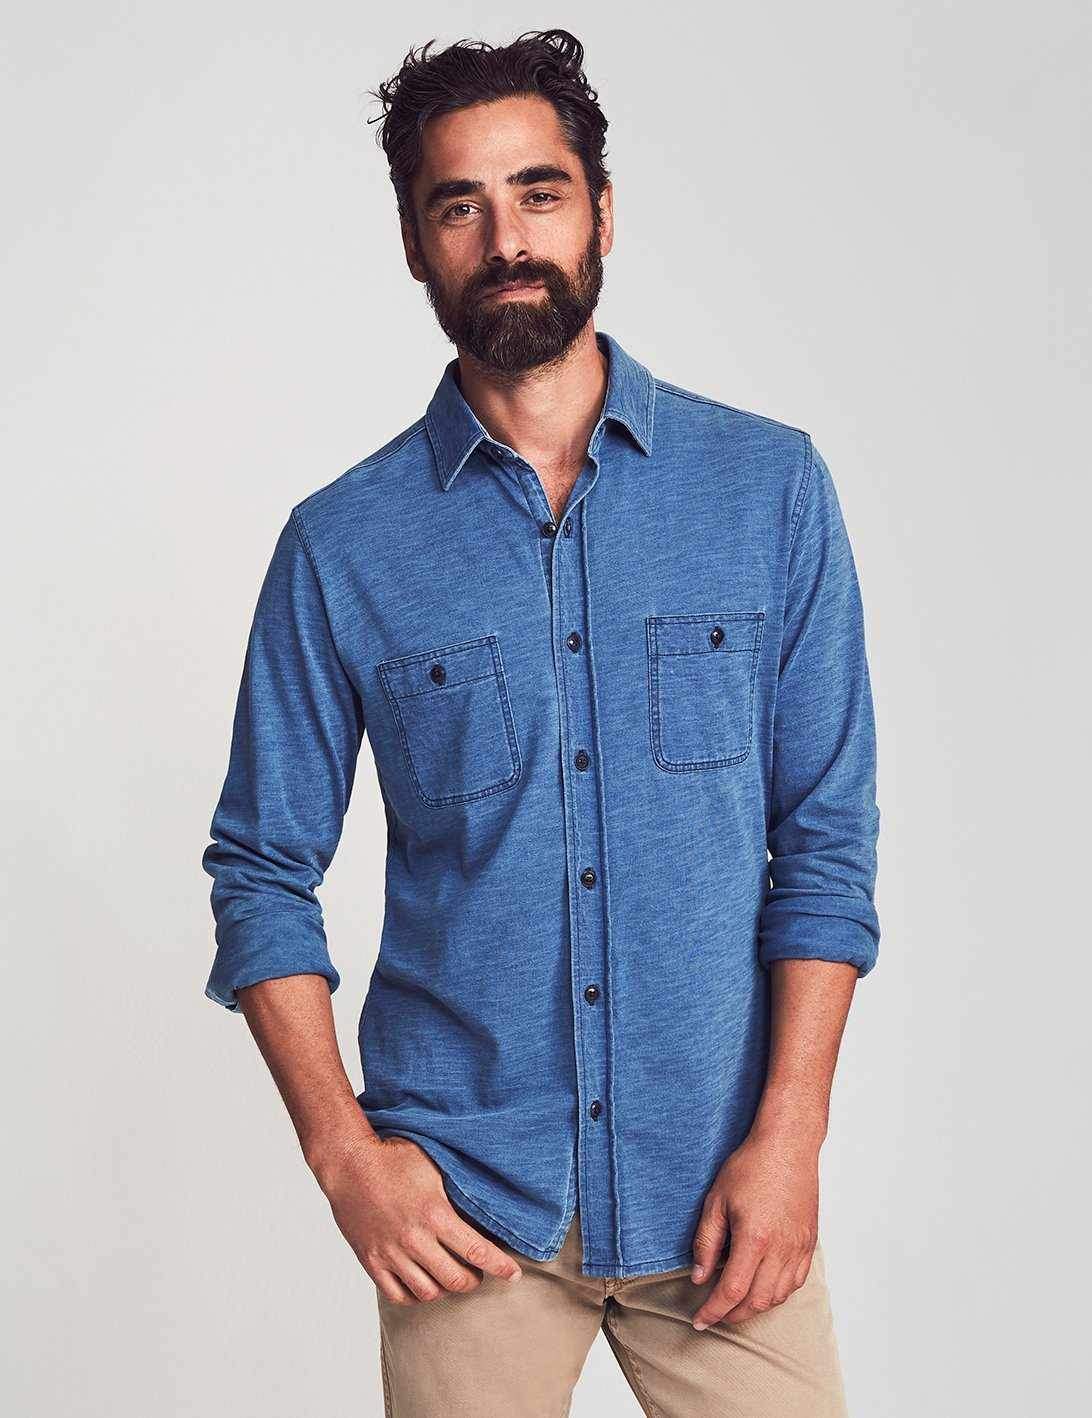 25% Off Faherty Clothes For Men This Black Friday + Cyber Monday - BroBible